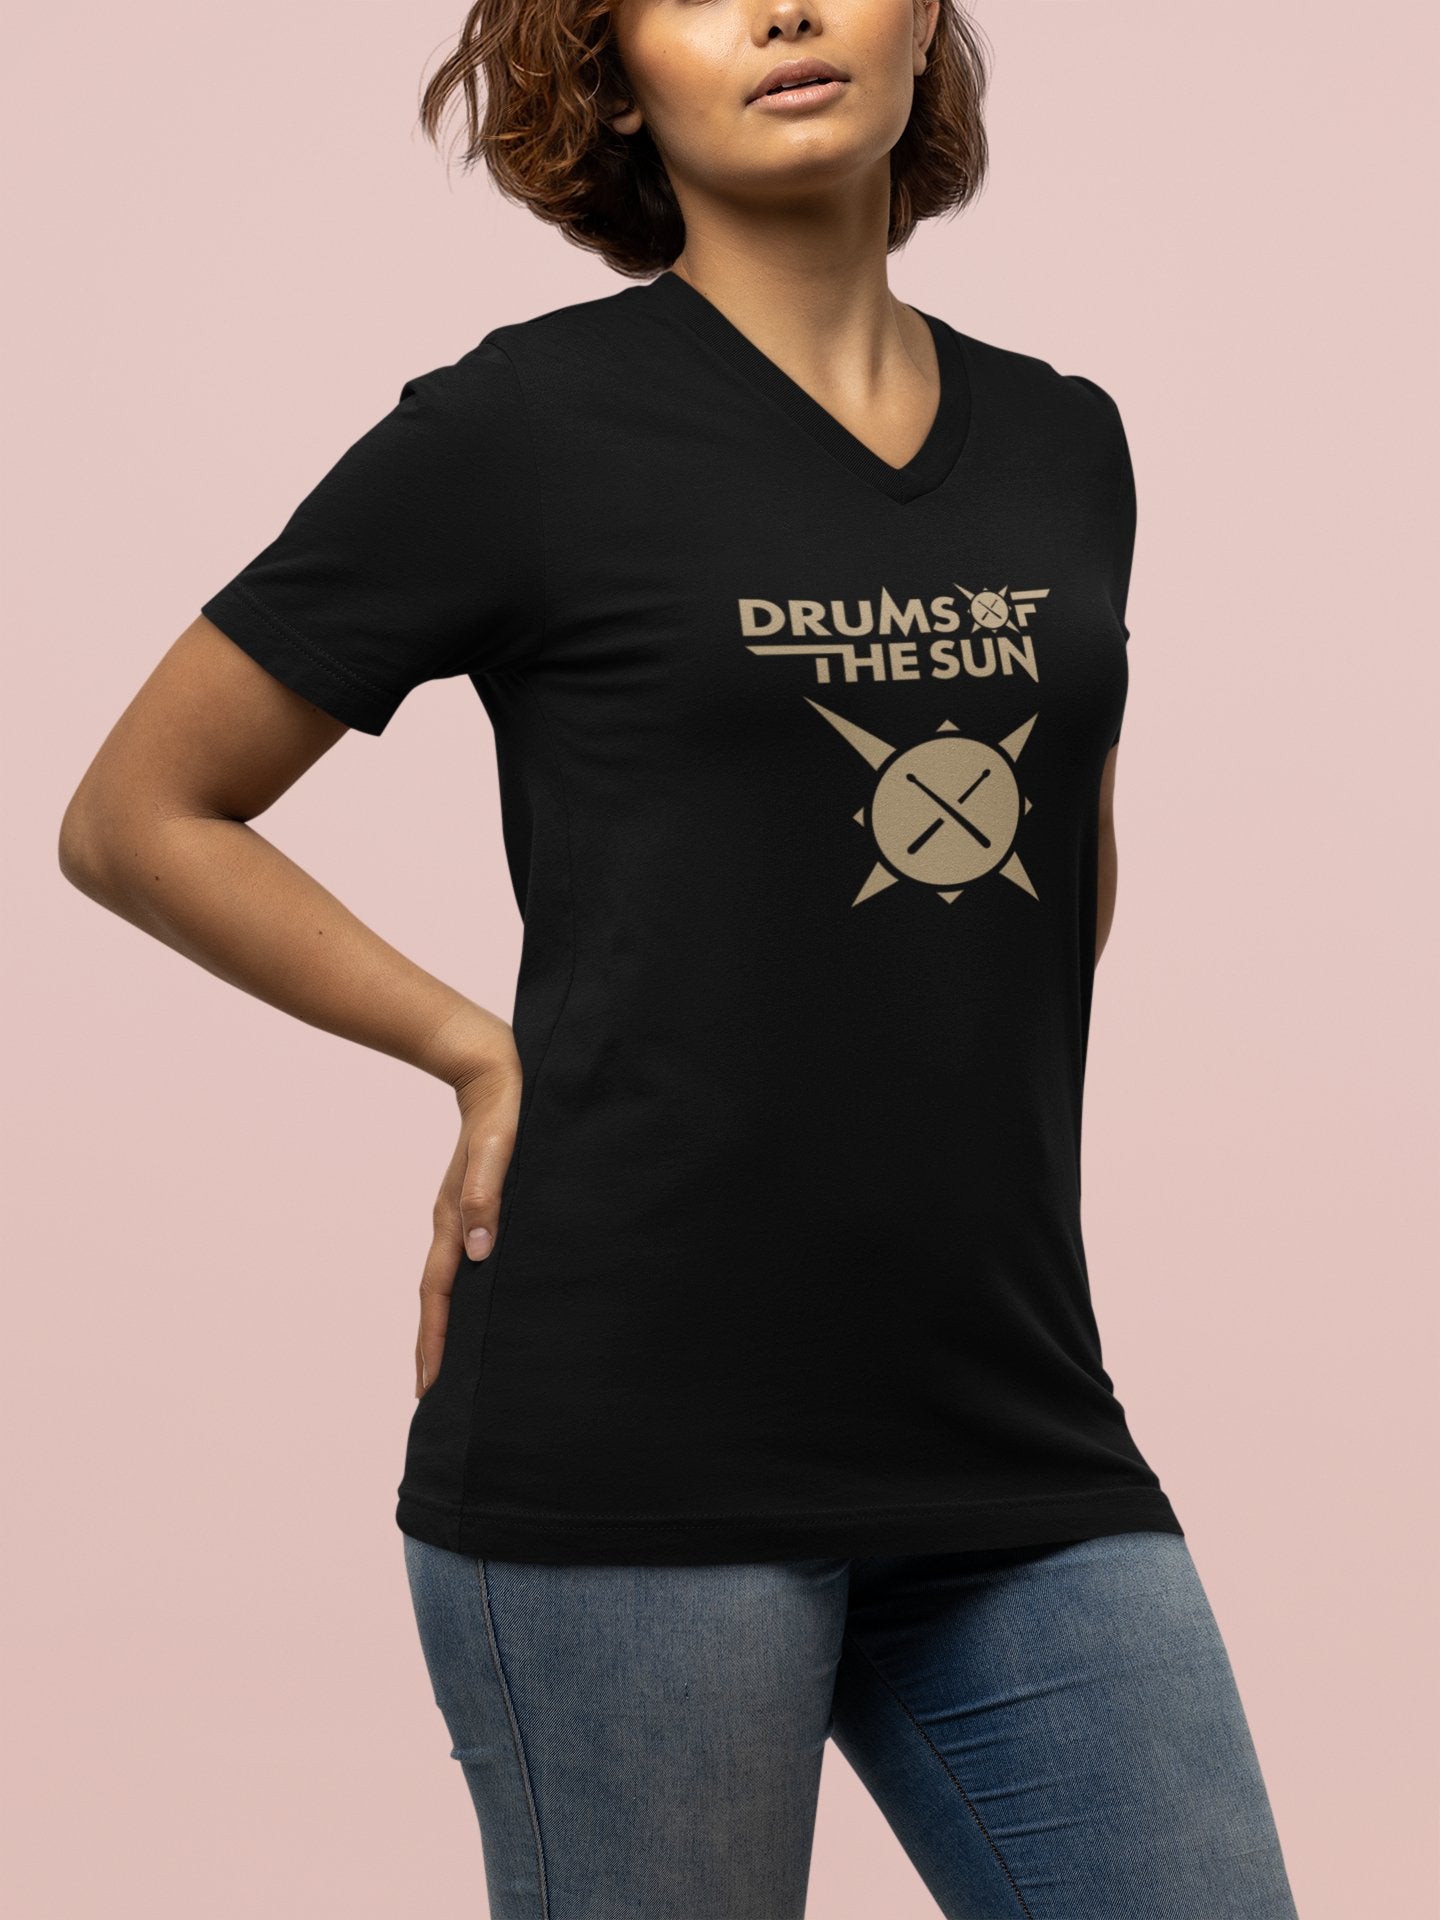 Drums of the Sun Unisex Short Sleeve V-Neck T-Shirt - BeExtra! Apparel & More